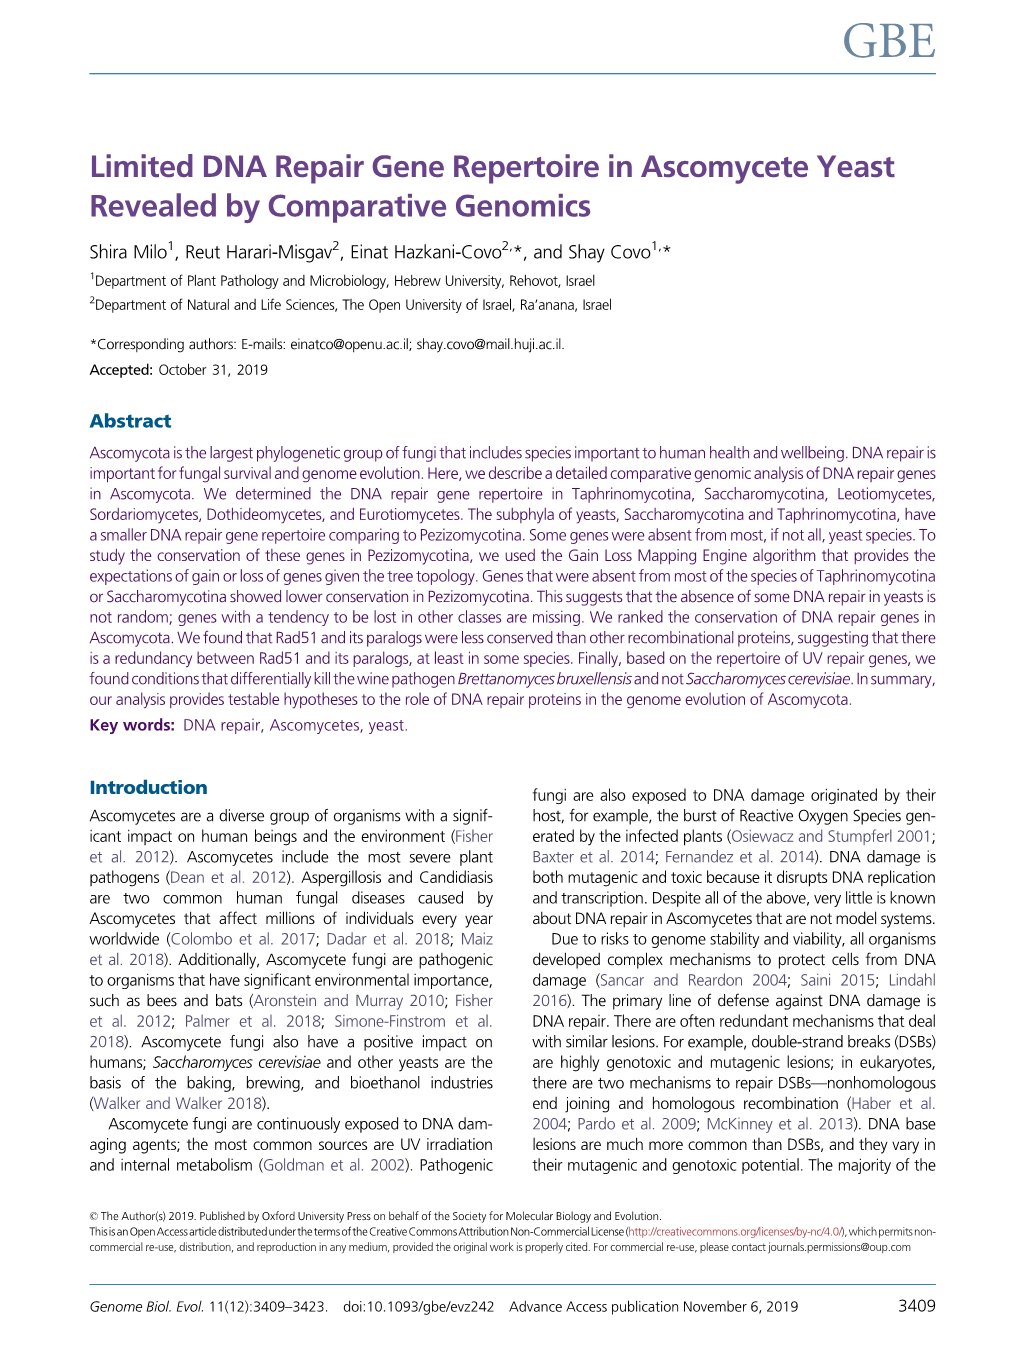 Limited DNA Repair Gene Repertoire in Ascomycete Yeast Revealed by Comparative Genomics